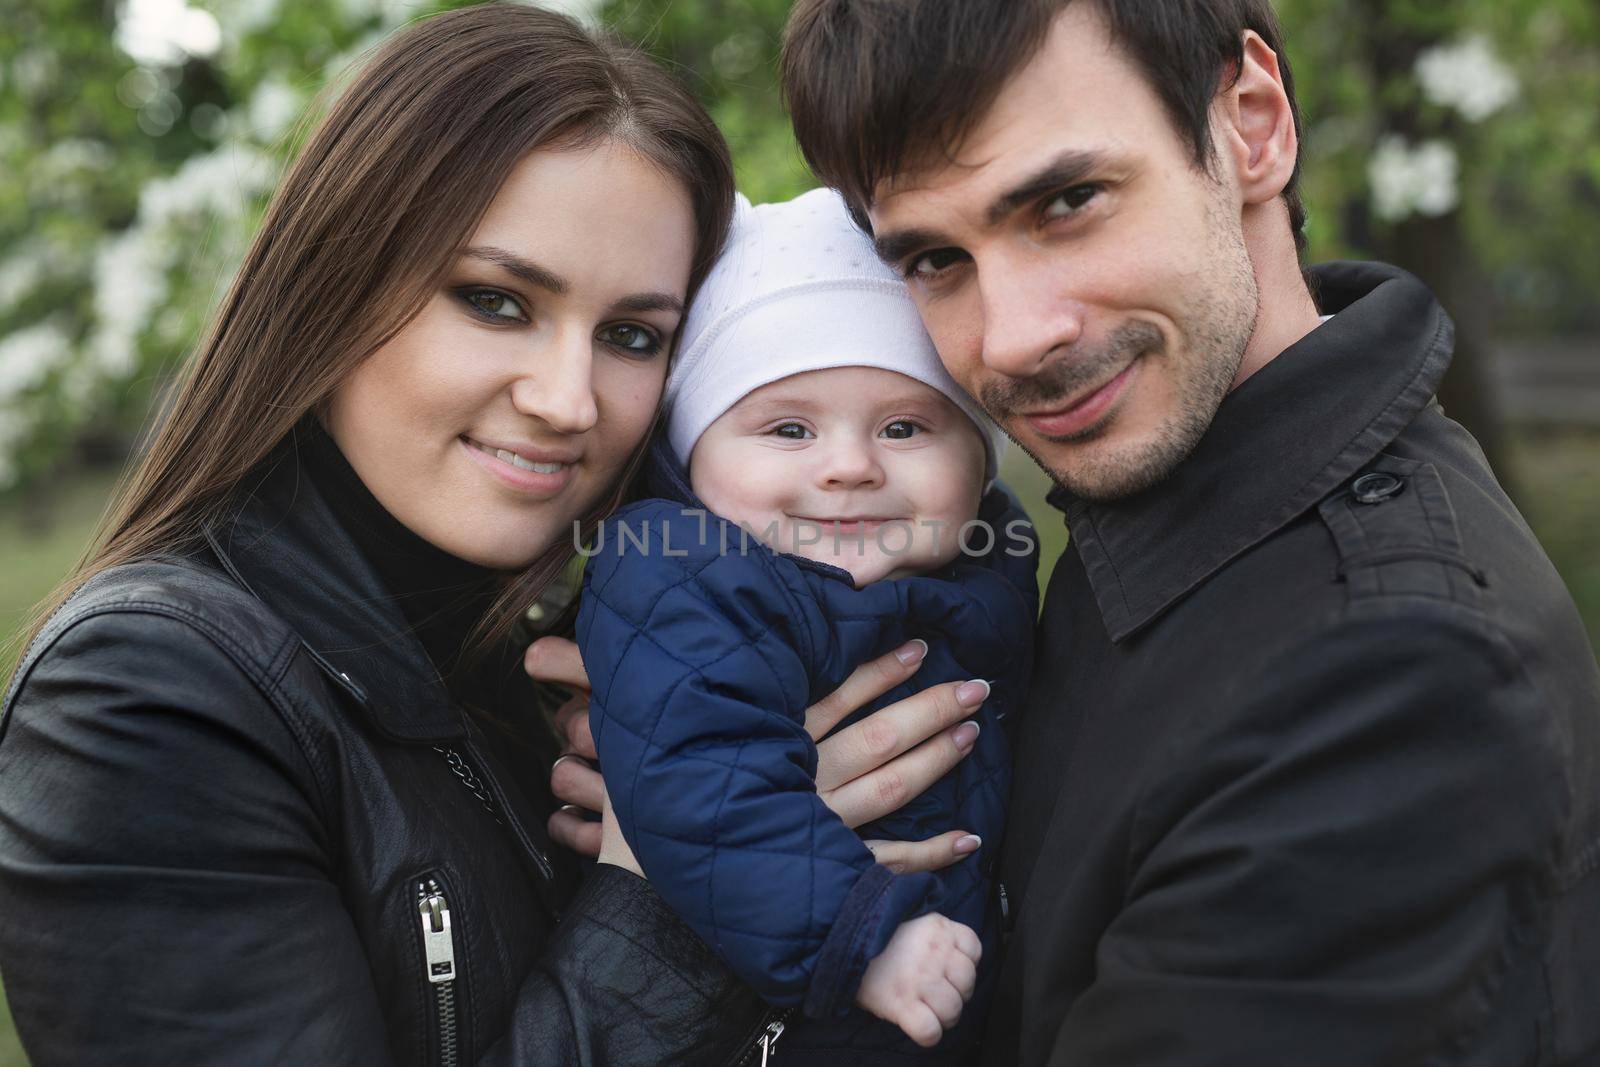 Beautiful smiling faces of people. A happy young family from three persons. by StudioPeace